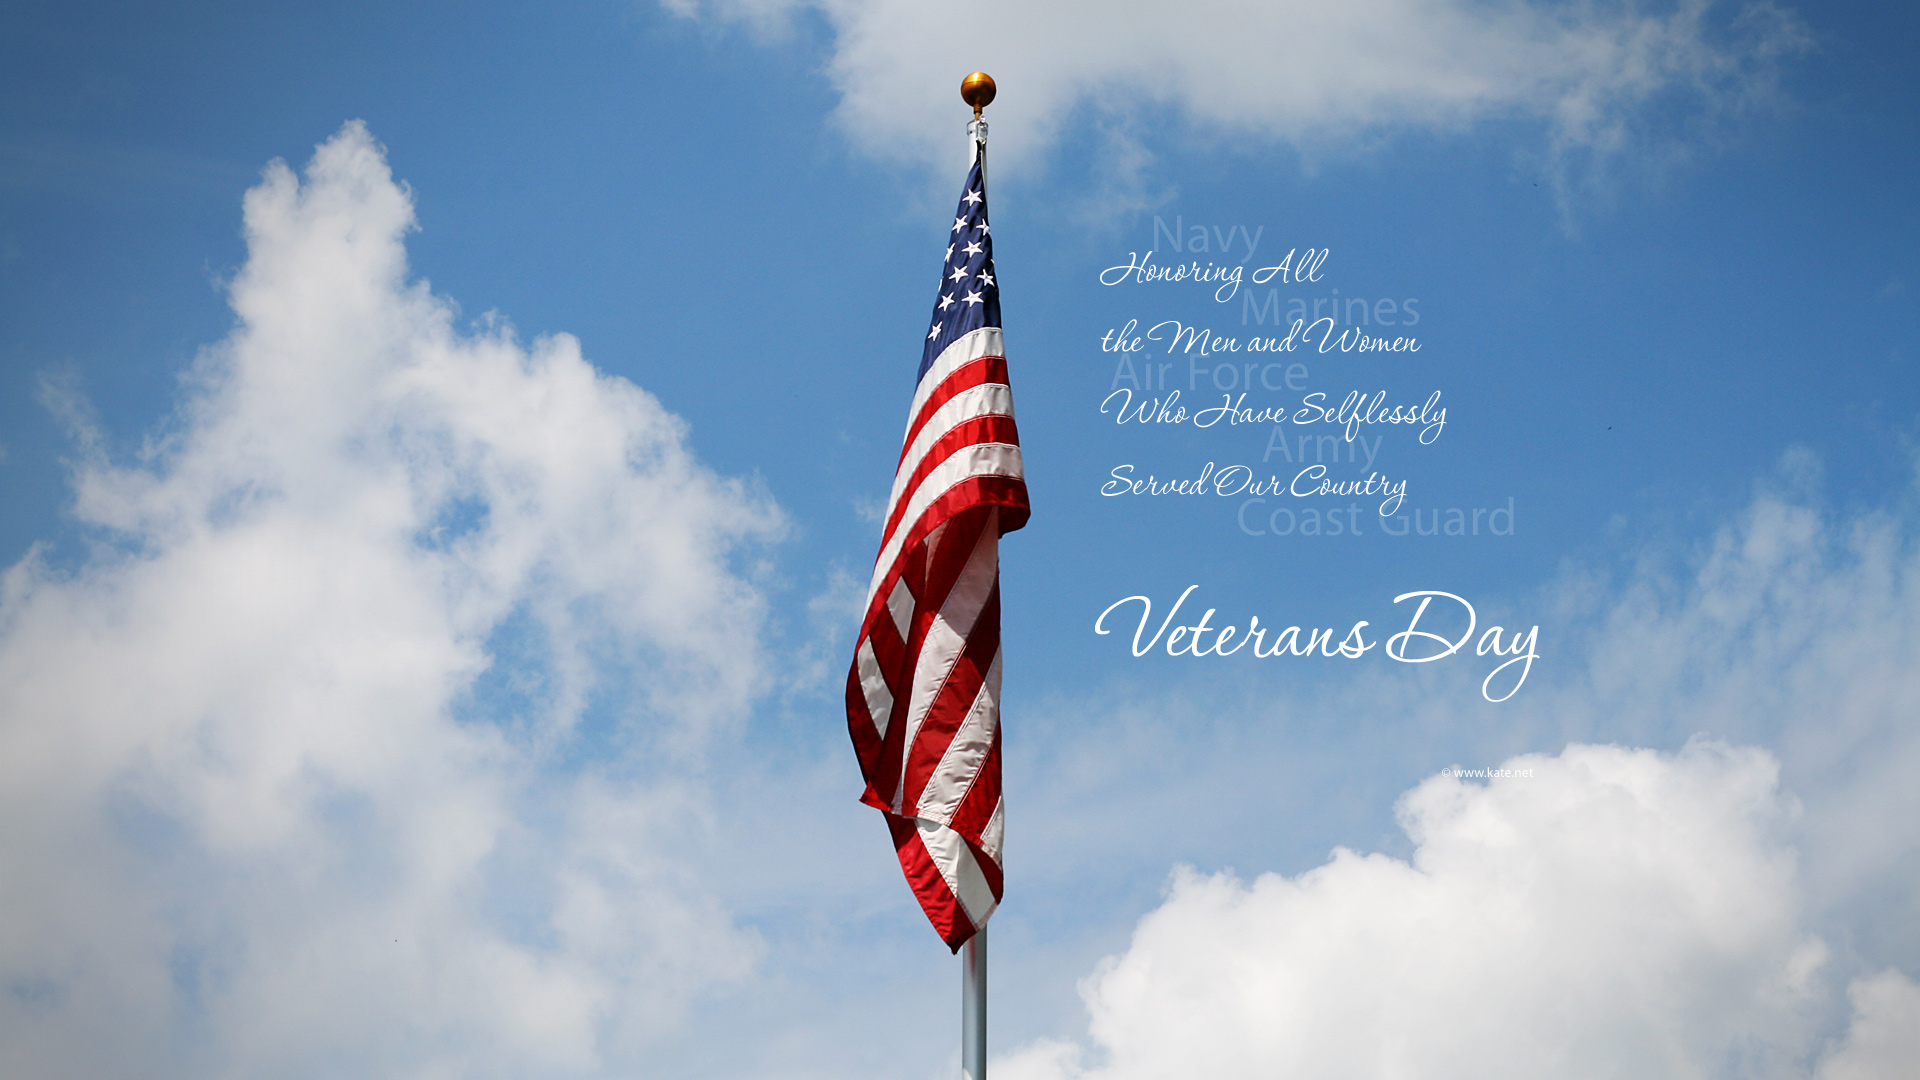 Veterans Day Wallpaper And Covers History On